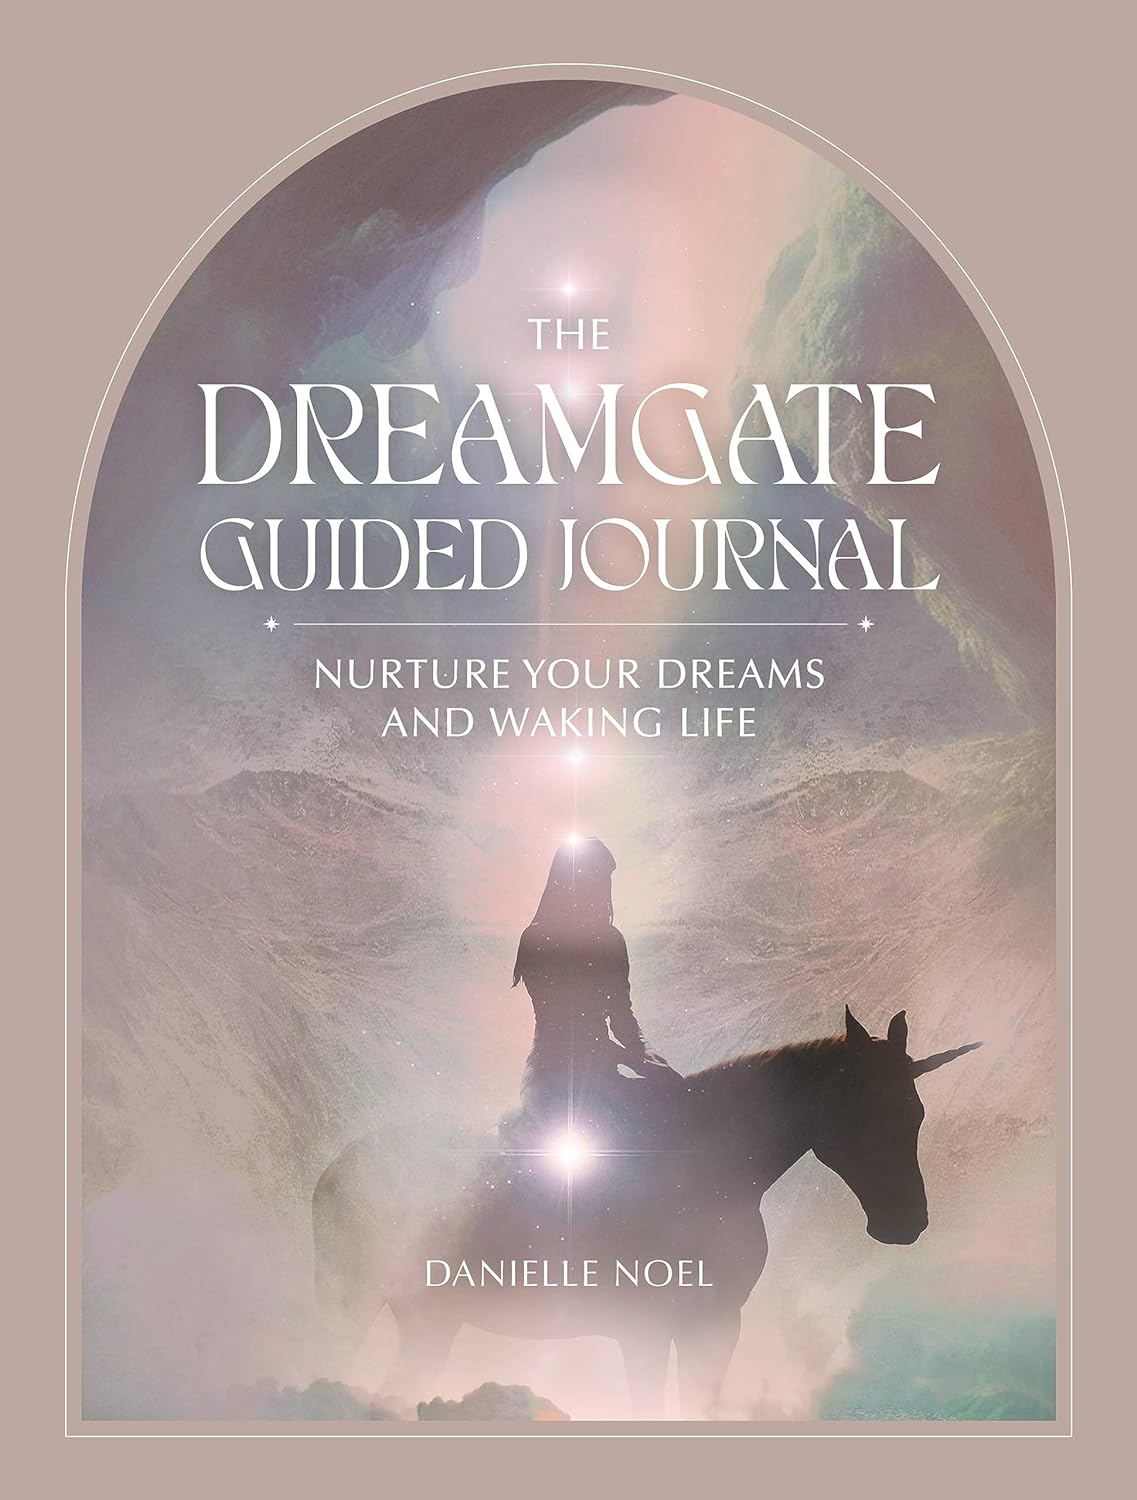 The Dreamgate Guided Journal : Nurture Your Dreams and Waking Life